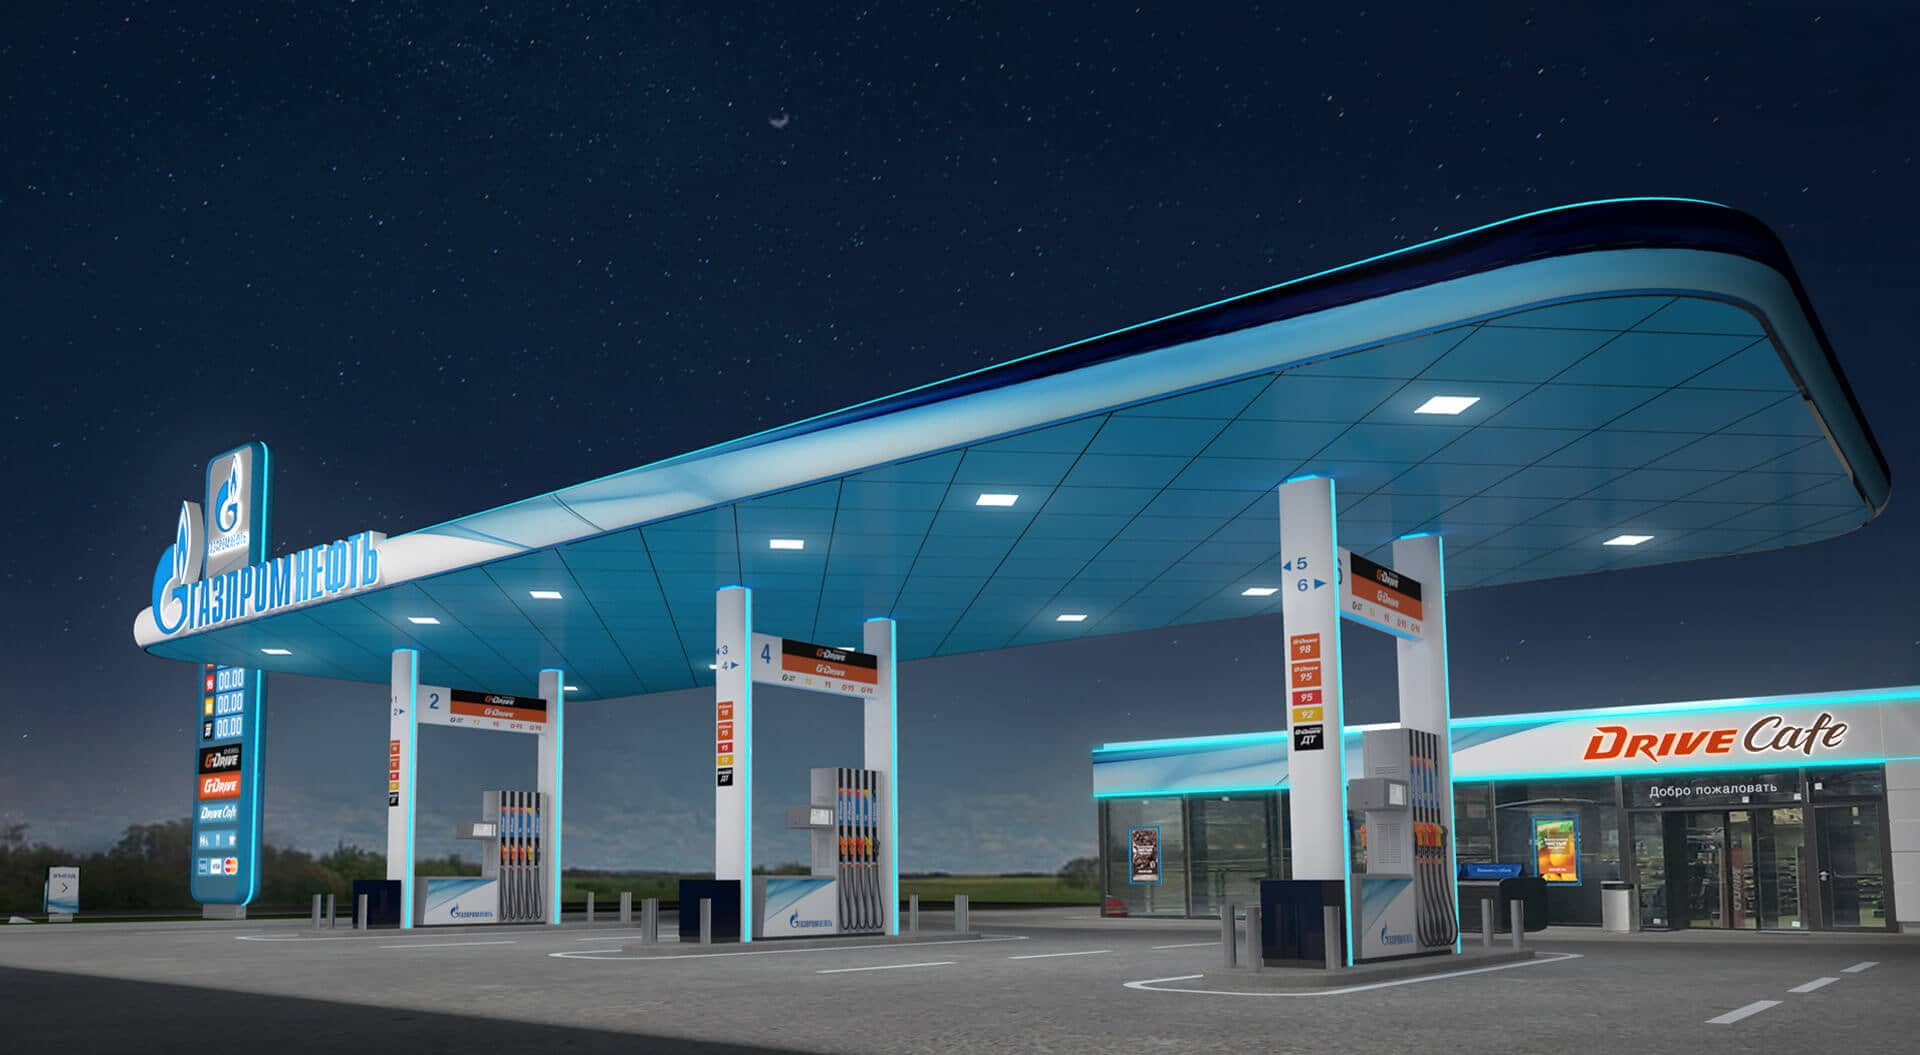 Gazprom Neft Russia petrol forecourt station retail interior store design for Drive Cafe and branding night view